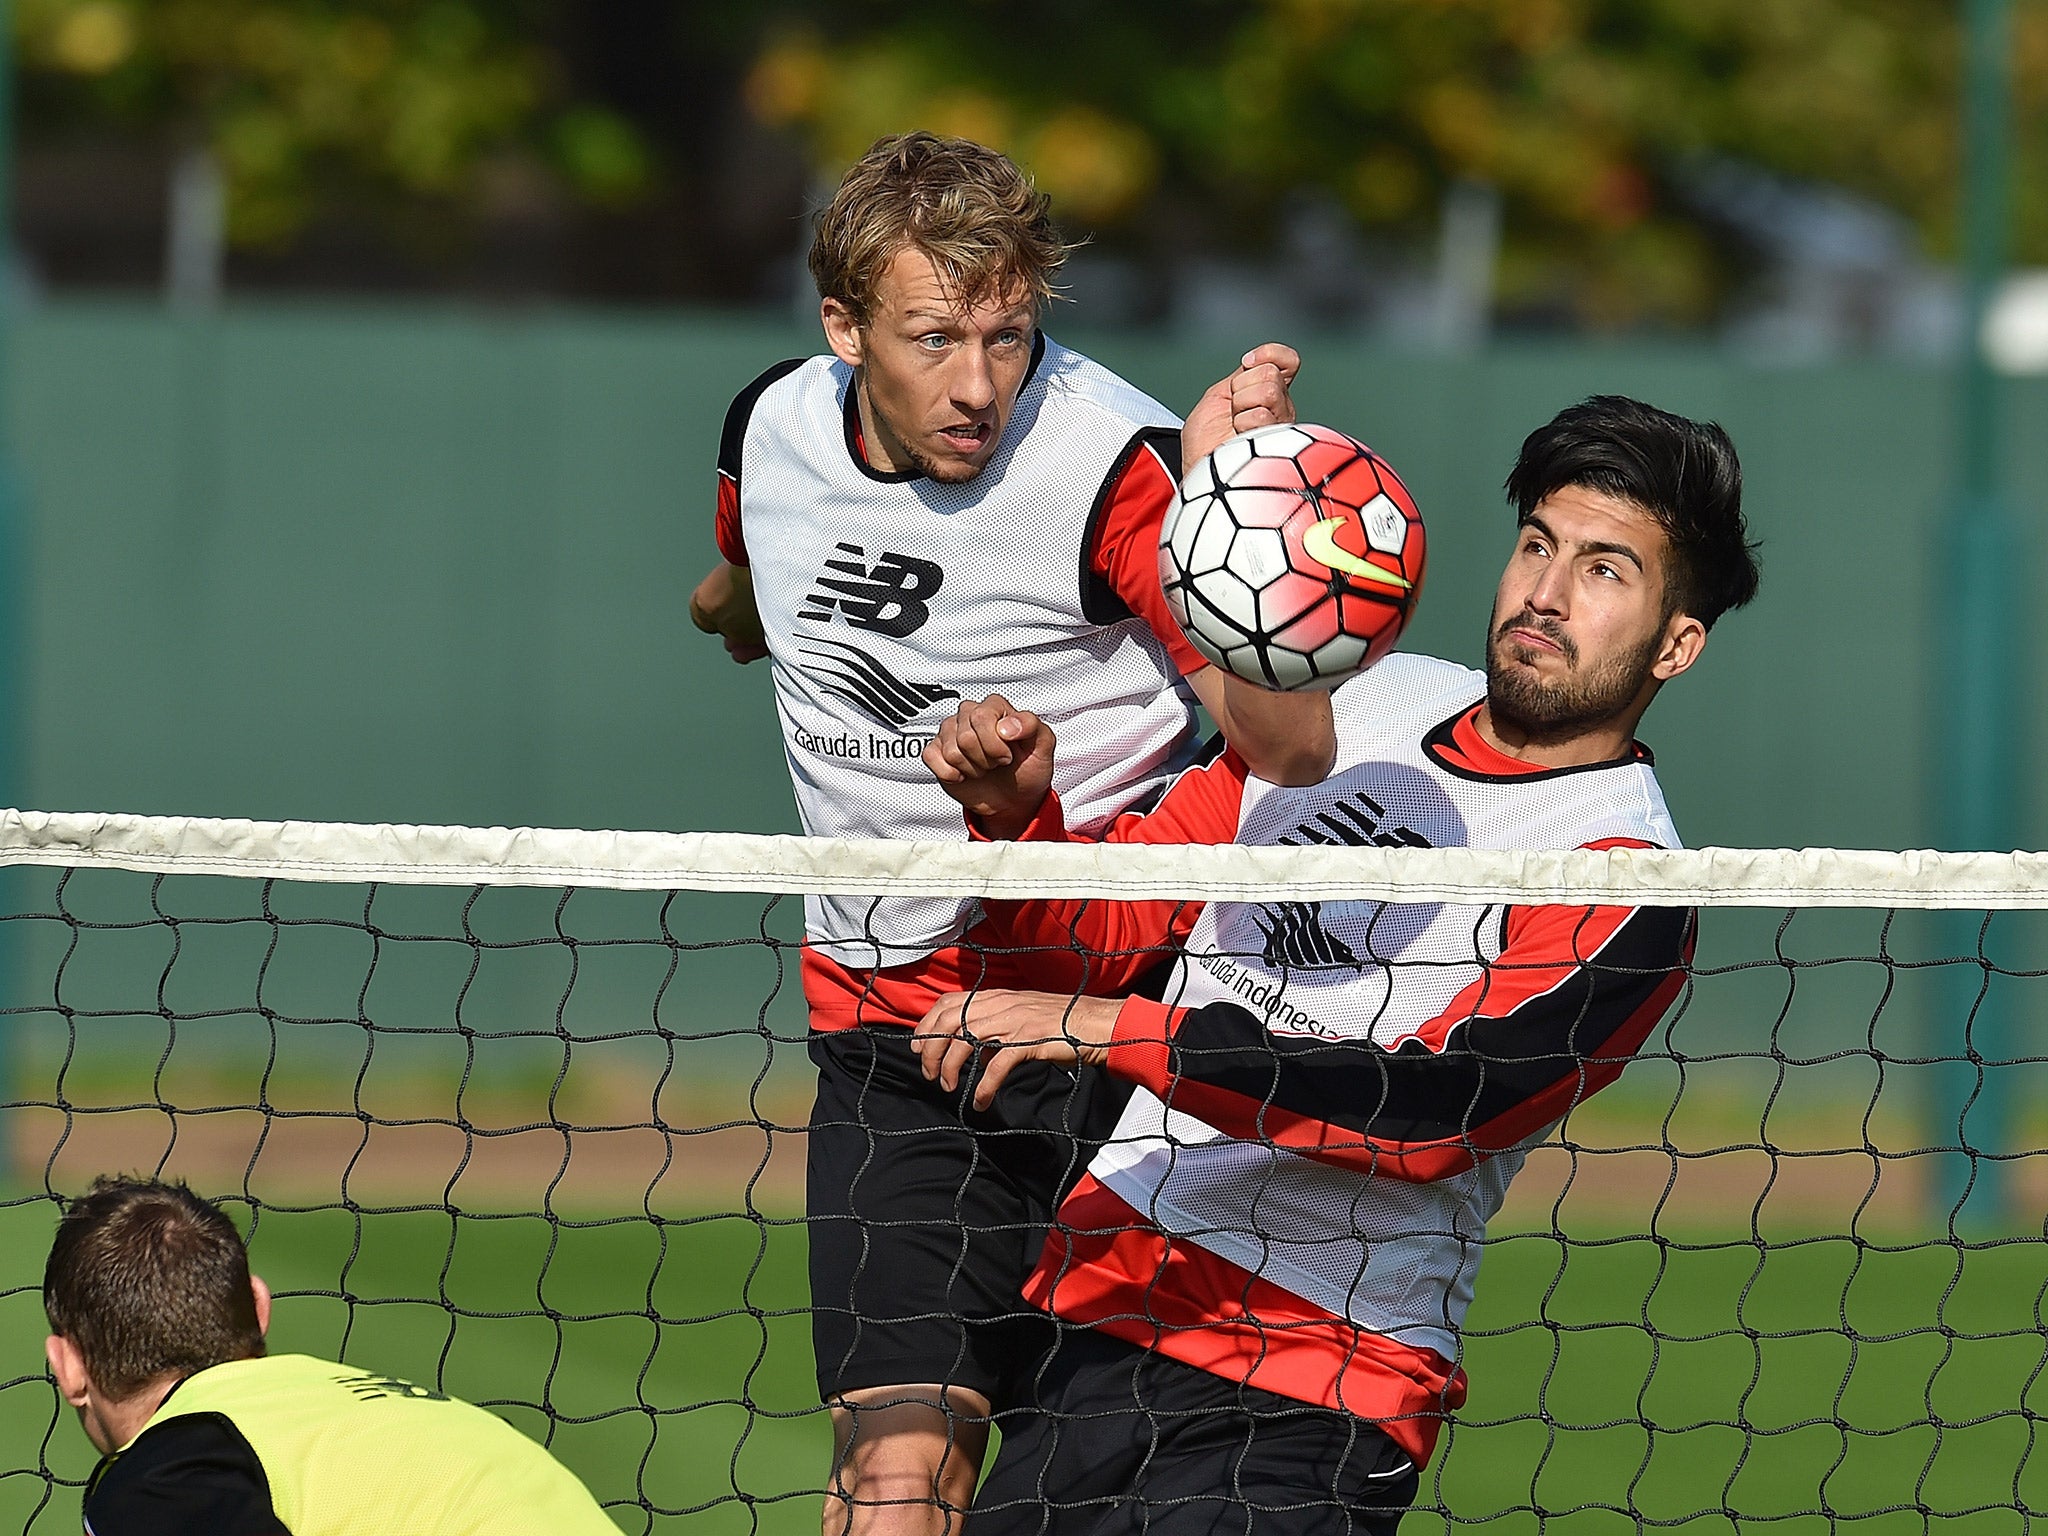 Lucas, left, challenges Emre Can for the ball in a training session earlier this season